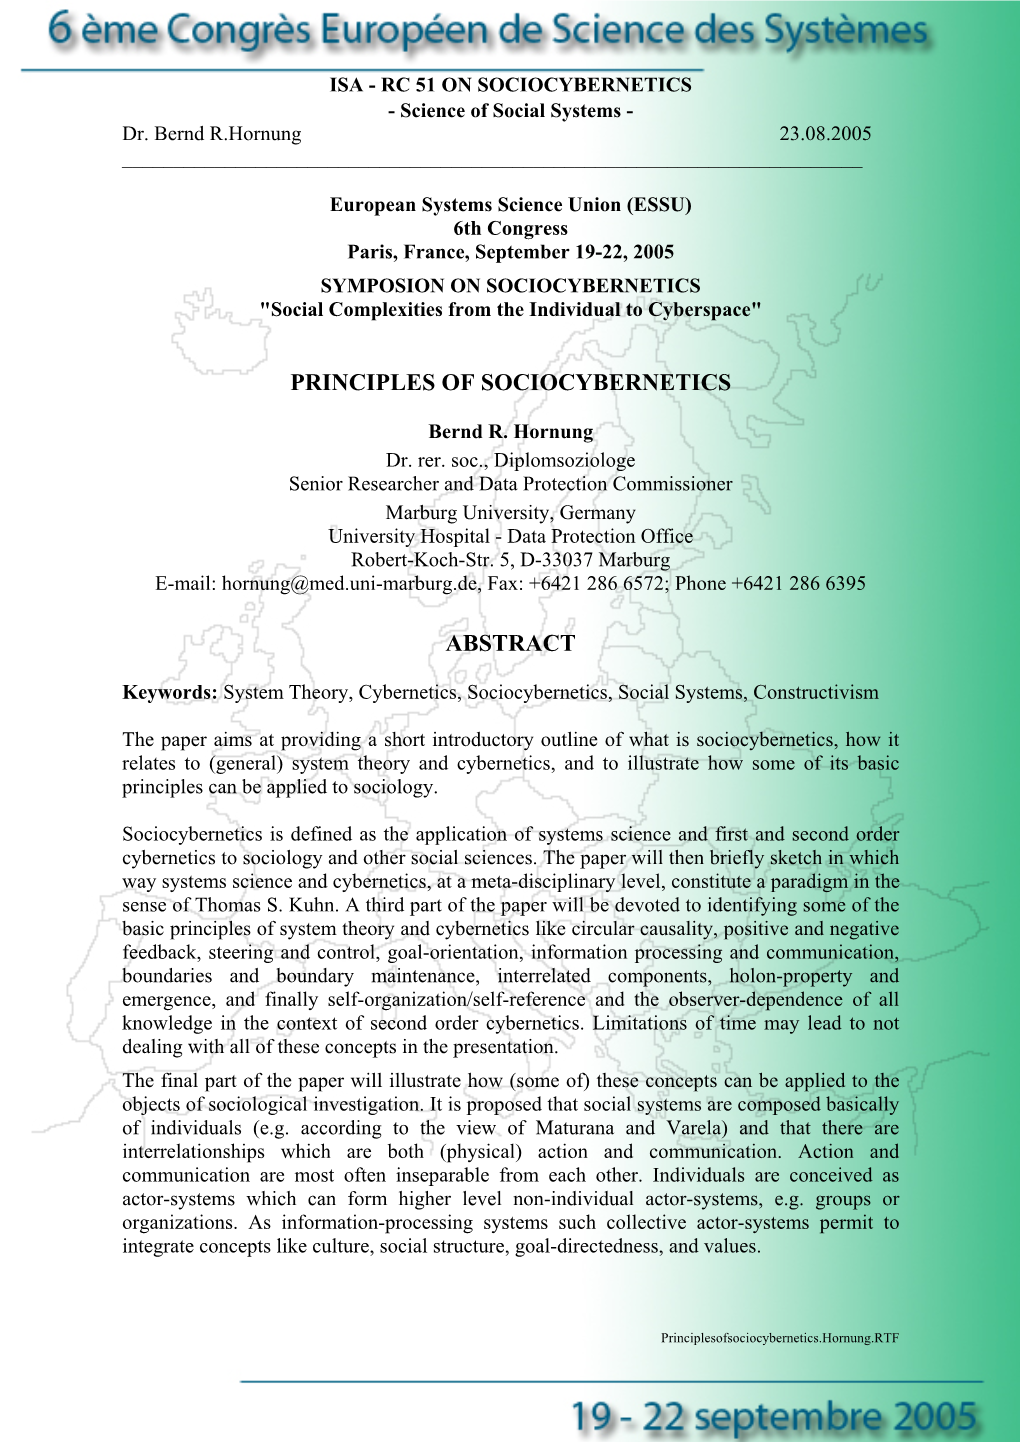 ISA - RC 51 on SOCIOCYBERNETICS - Science of Social Systems - Dr